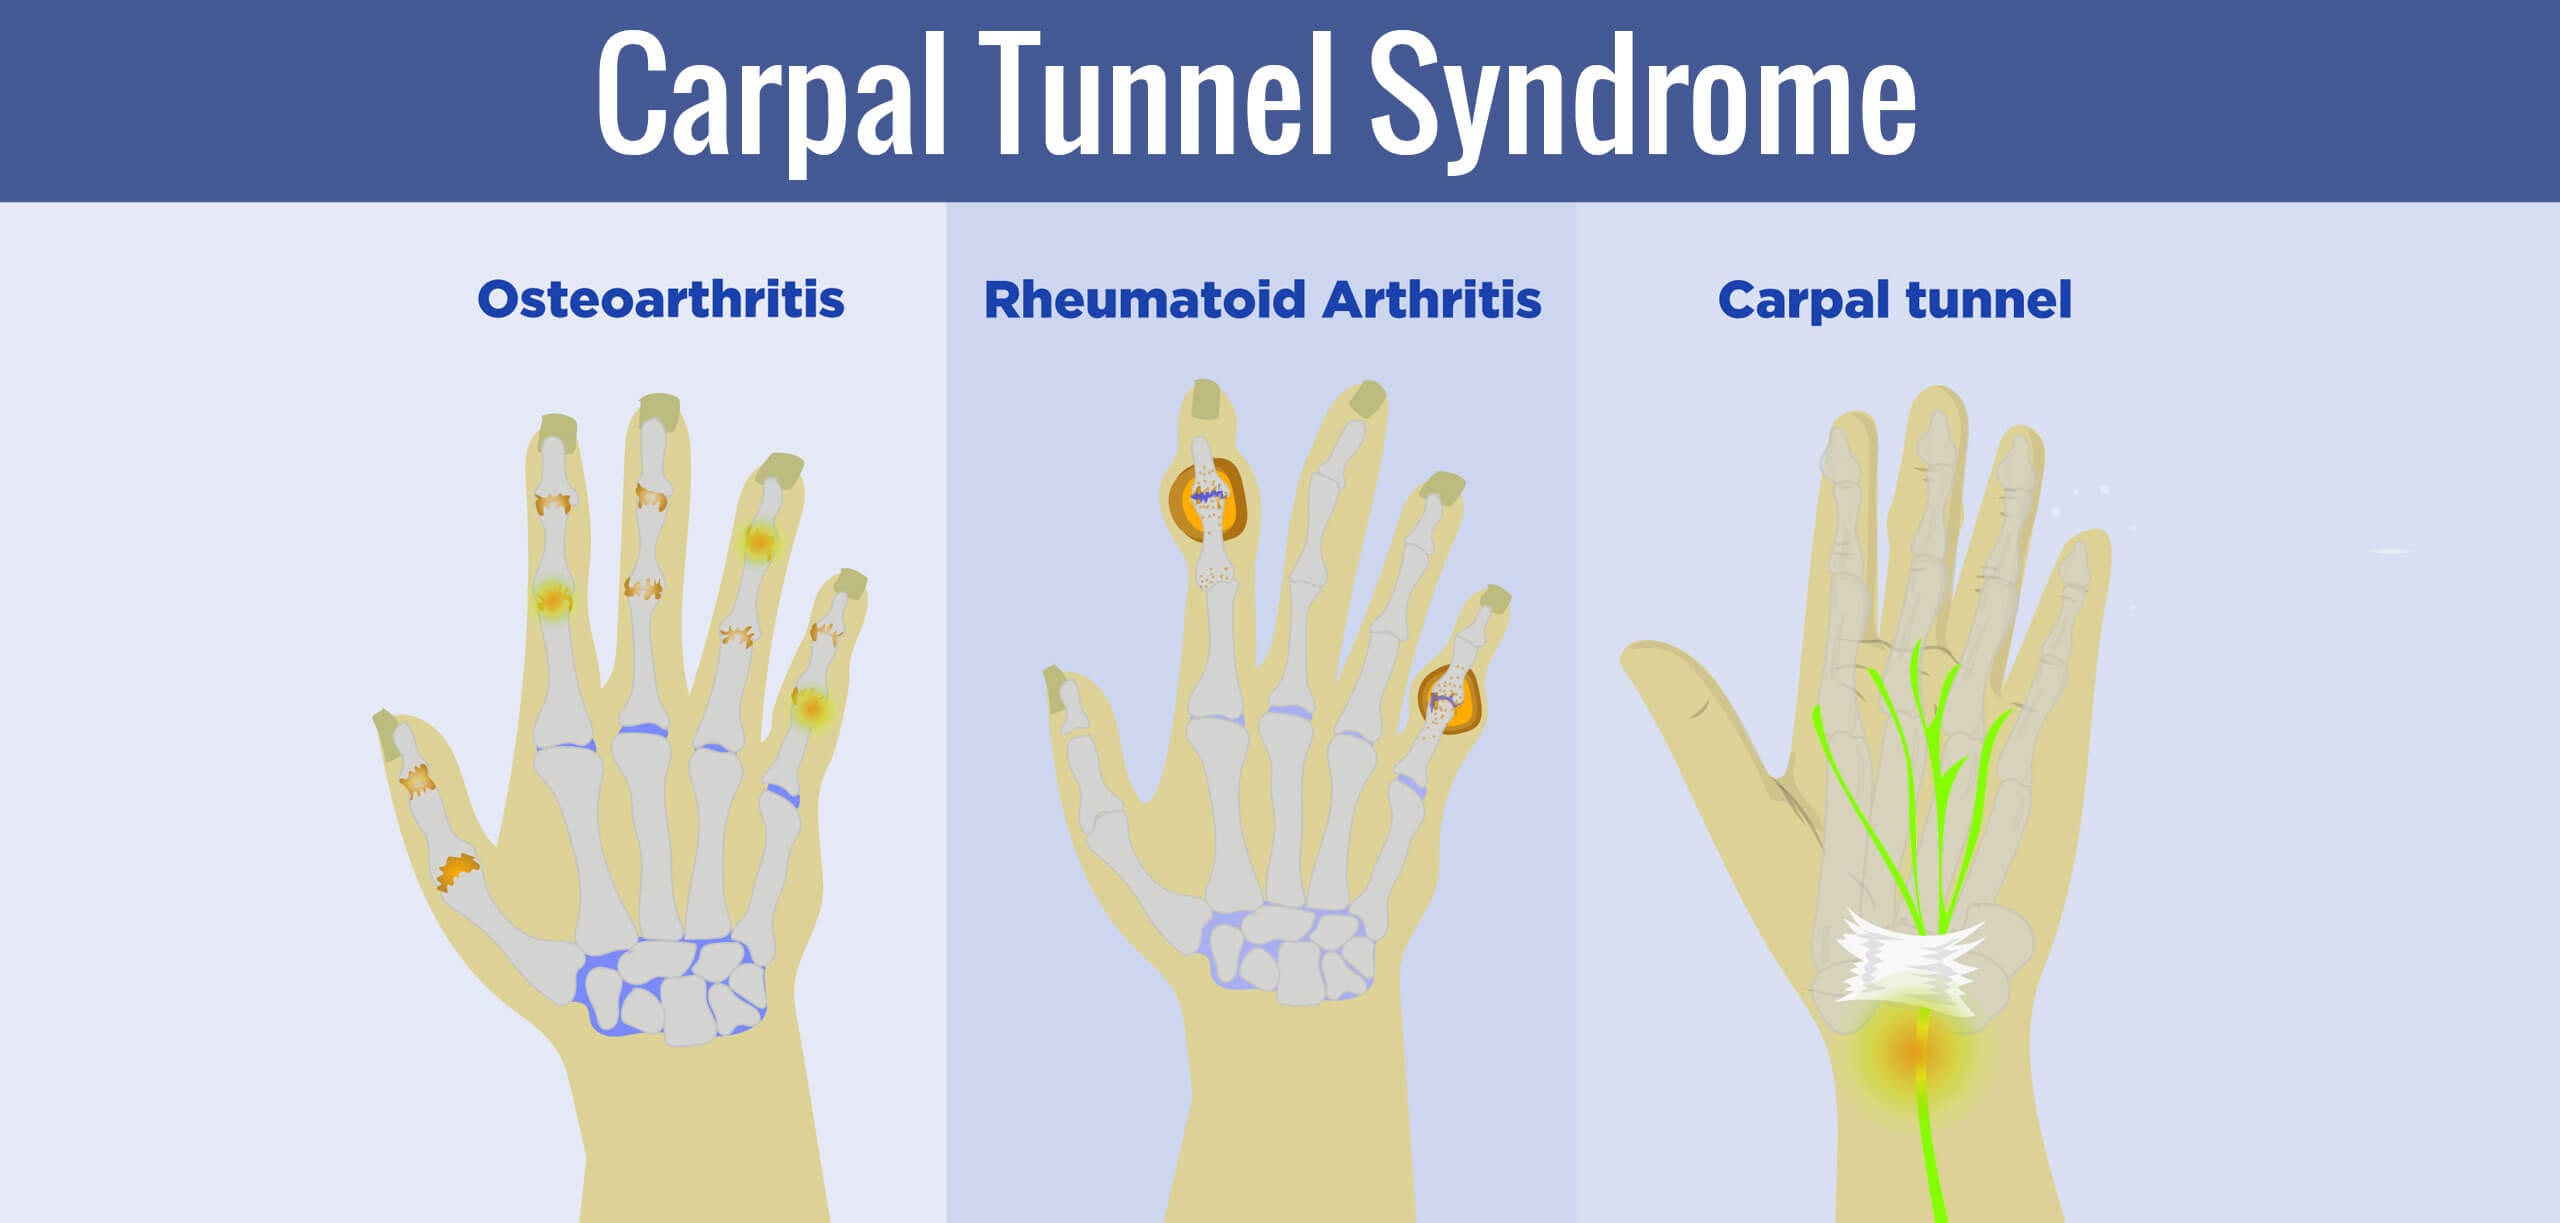 carpal tunnel syndrome treatment near gaithersburg md